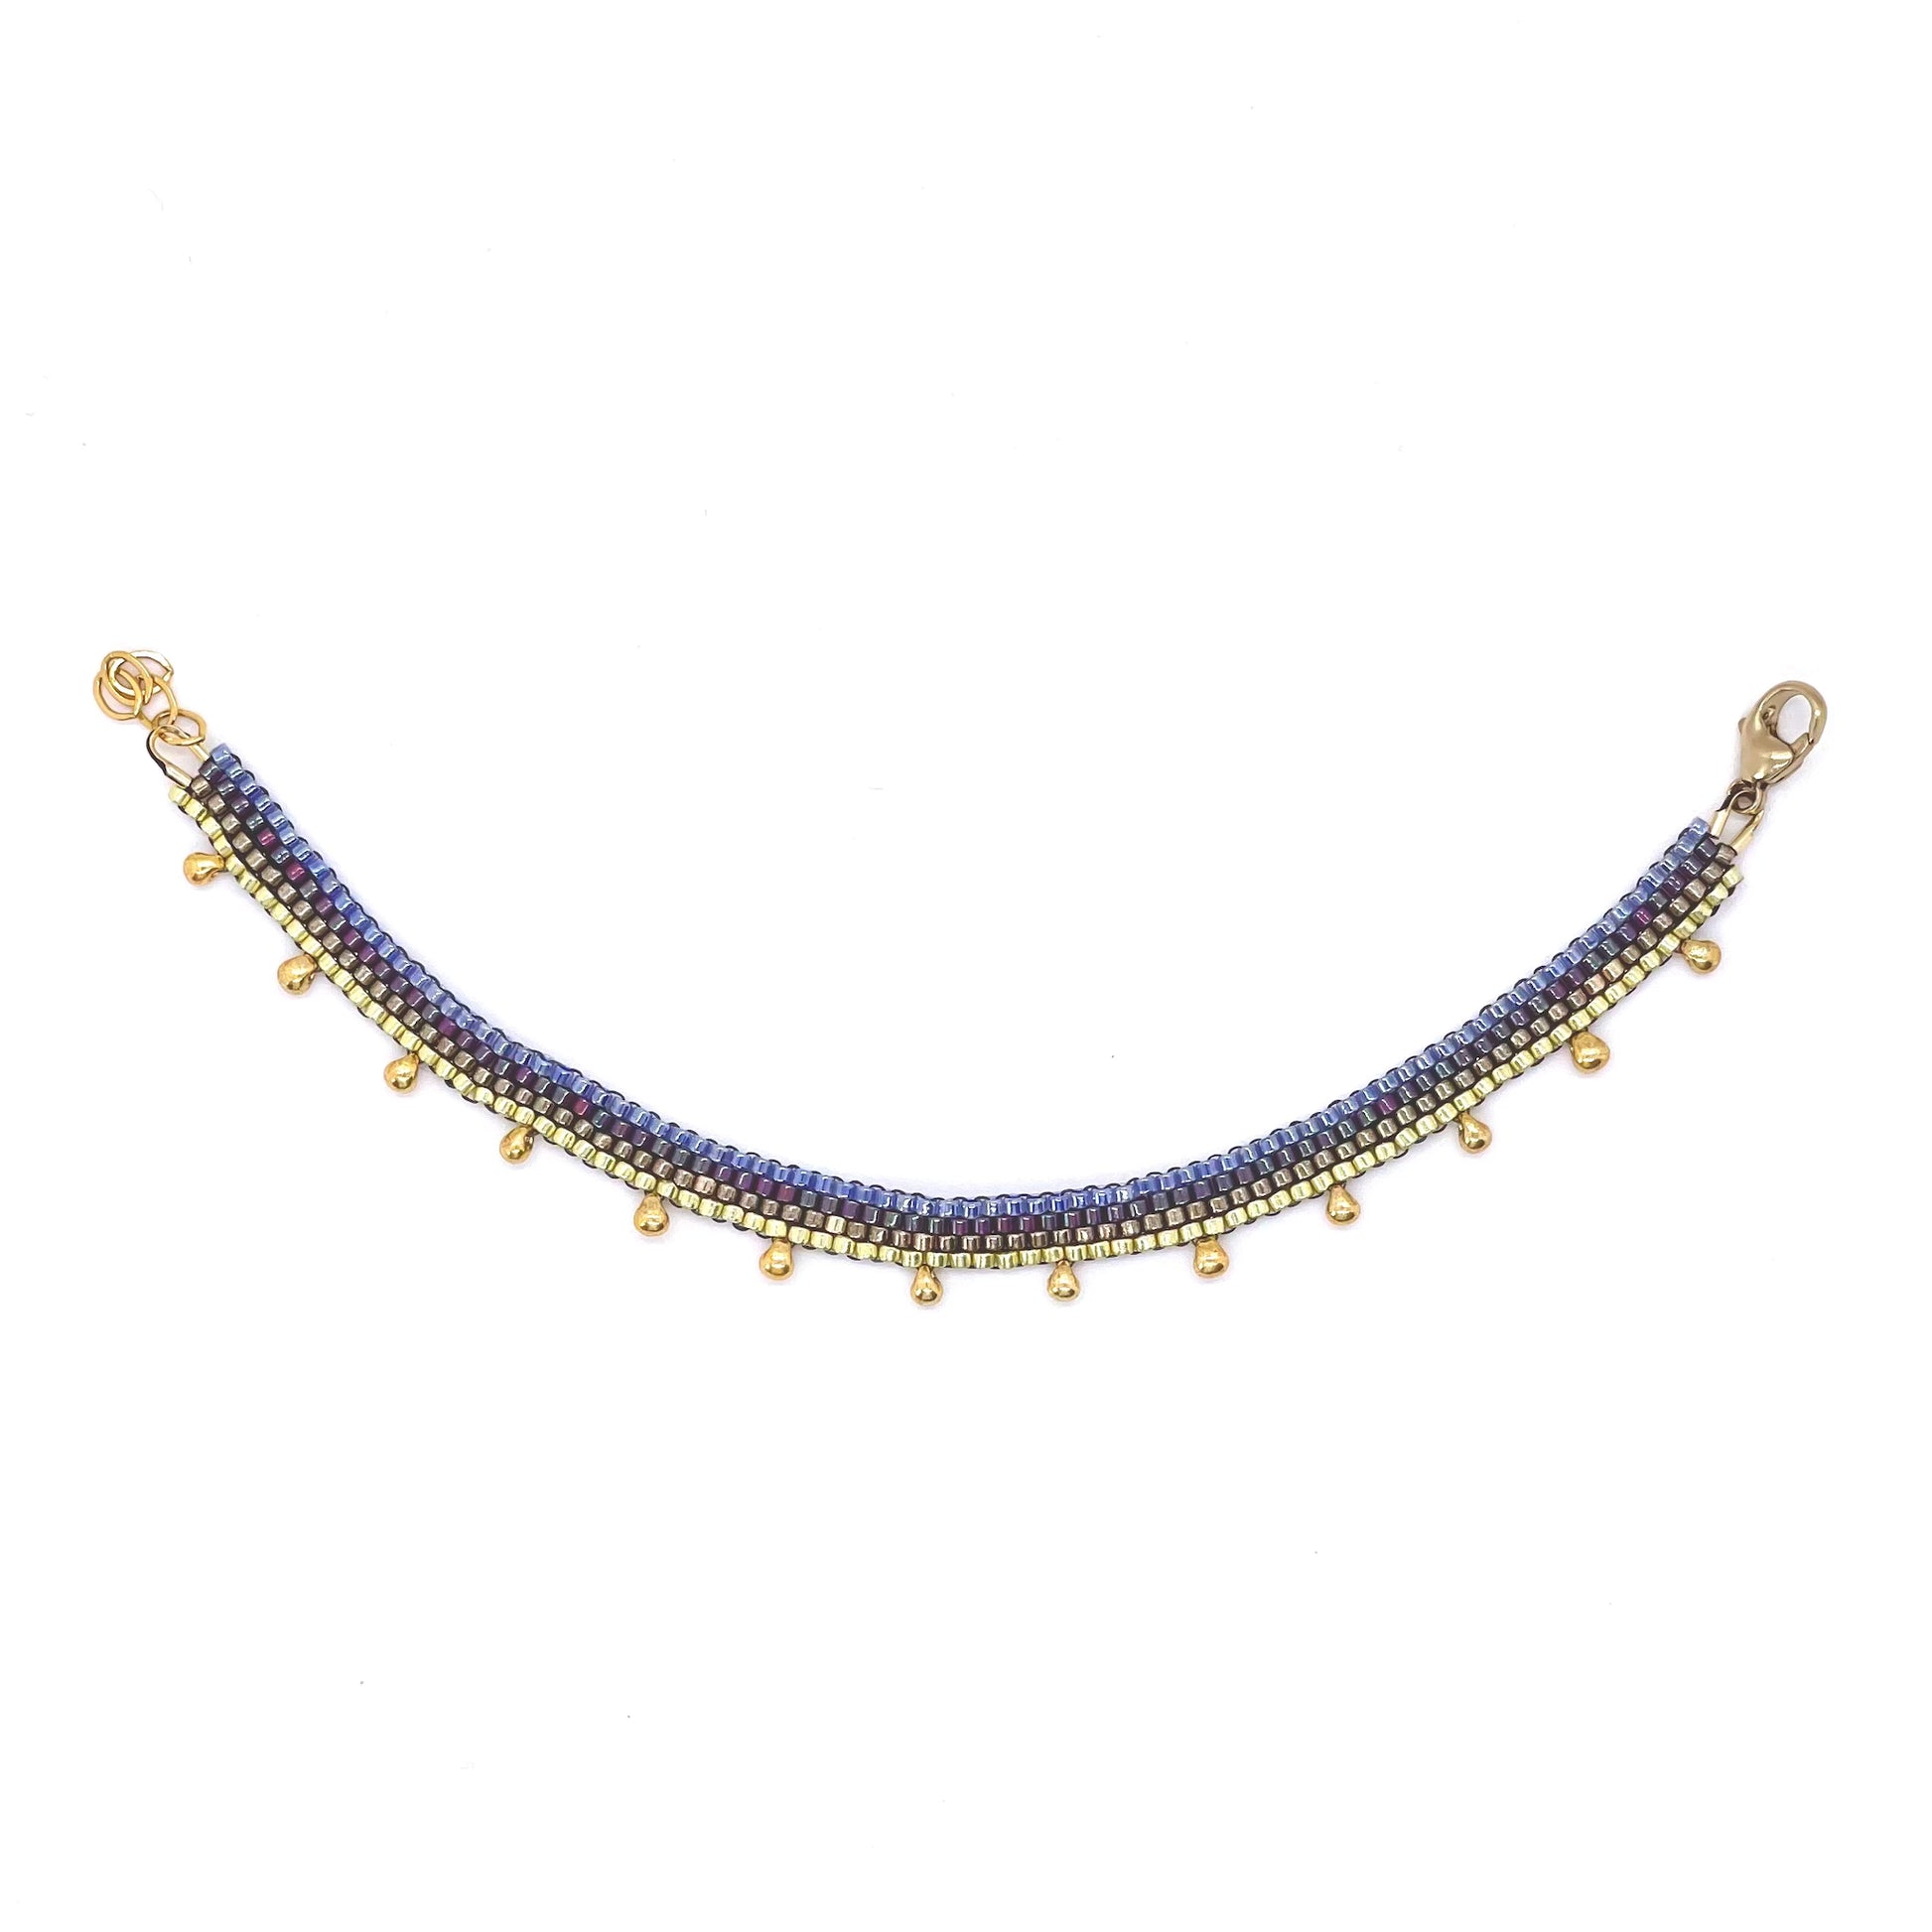 Thin anklet with gold tone and iridescent purple and blue seed beads. Colorful peyote stitch ankle bracelet.